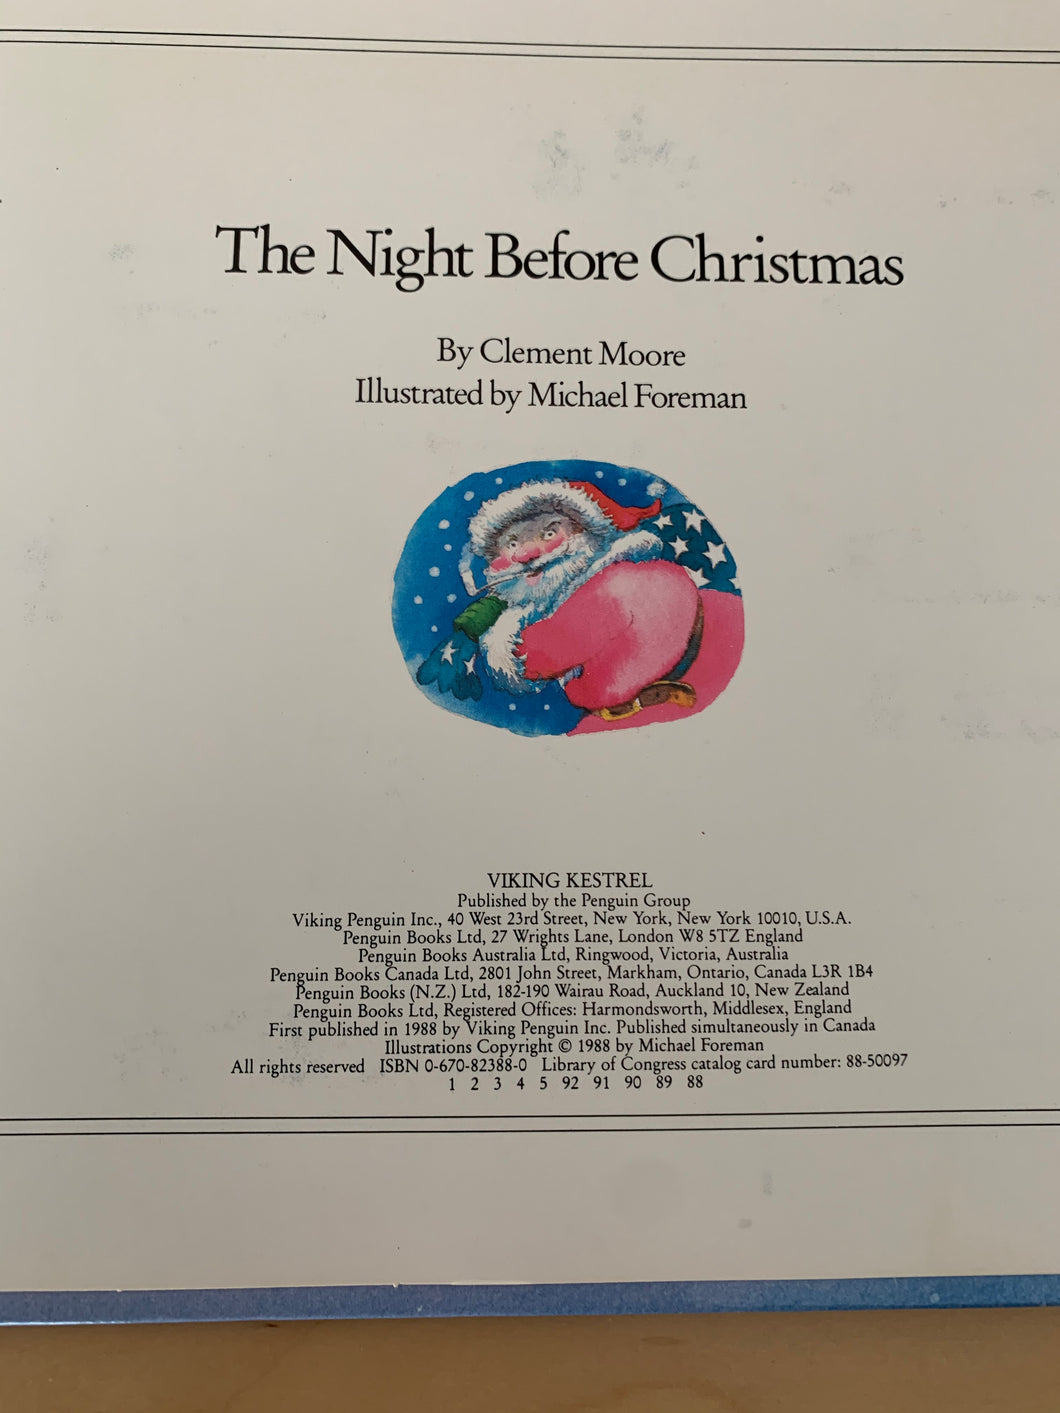 THE NIGHT BEFORE CHRISTMAS - LIFT-UP FLAPS Rebus POP-UP BOOK